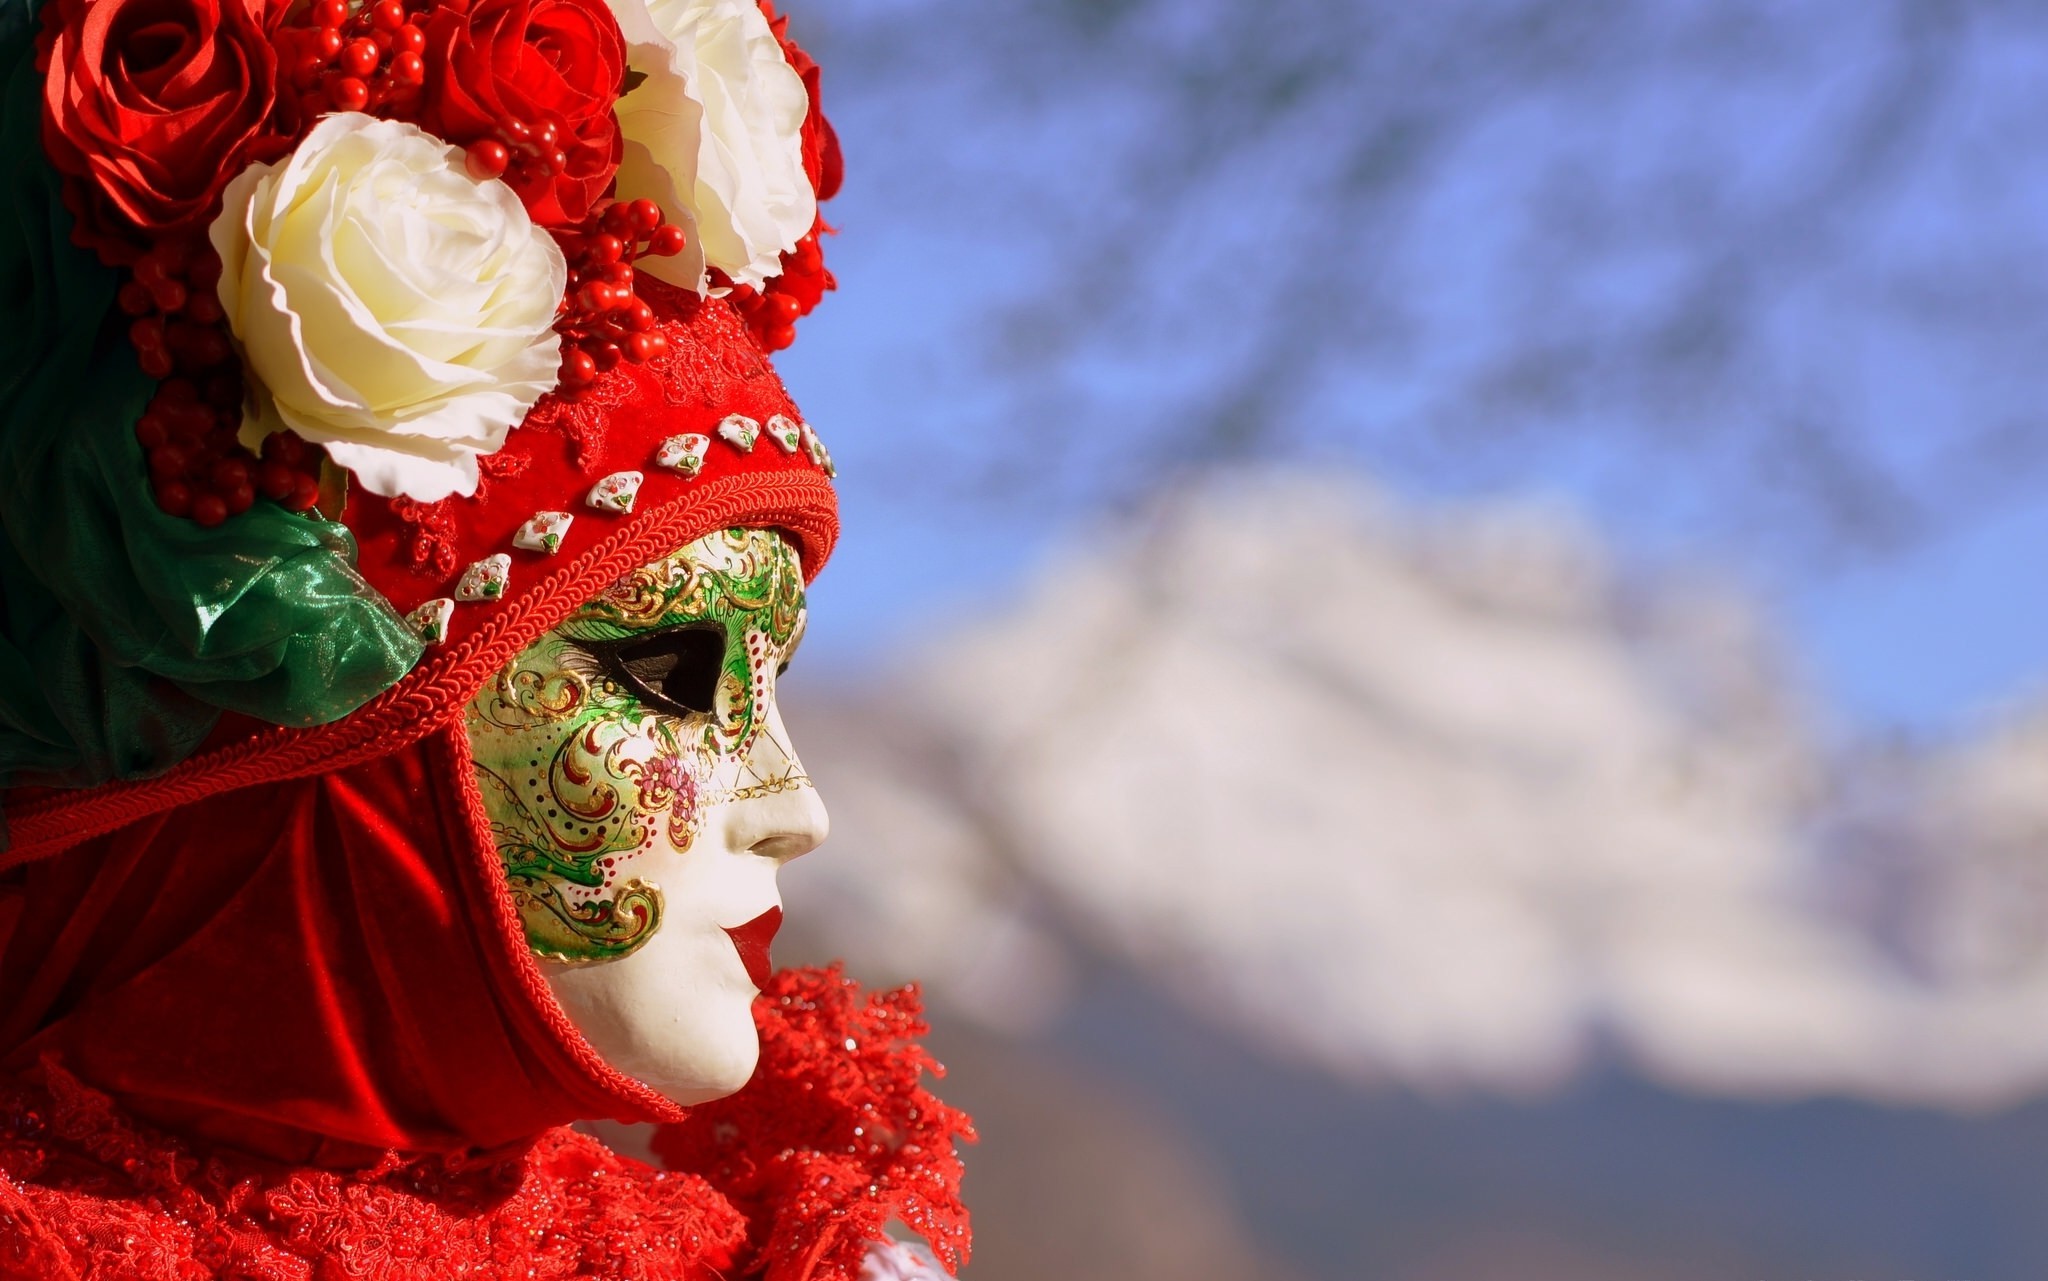 profile, Carnivals, Mask, Flowers, Costumes Wallpaper